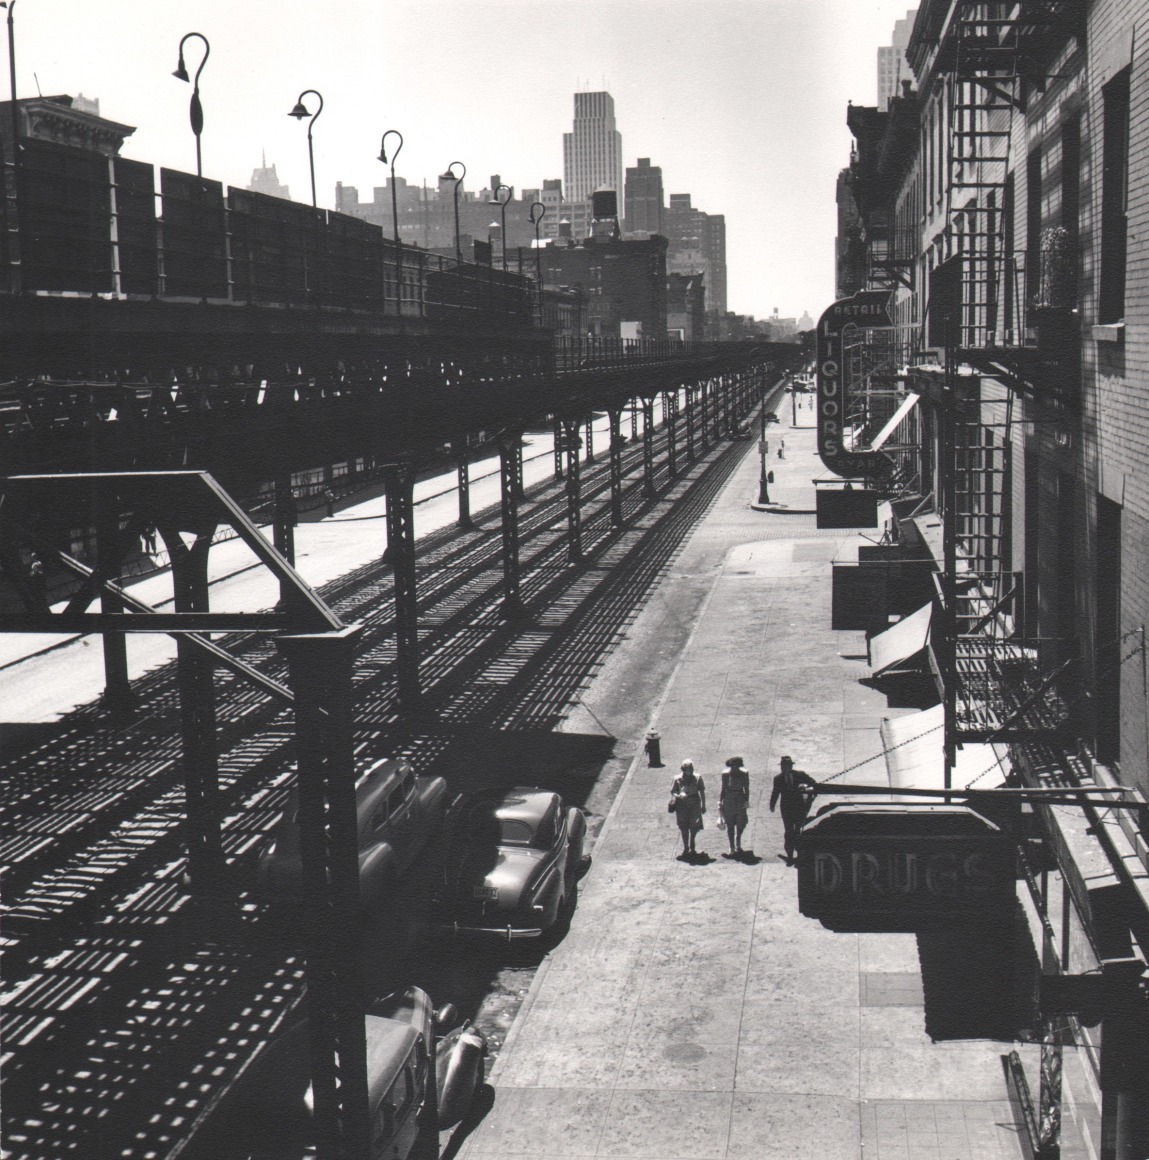 45. Esther Bubley, View of Third Avenue El looking downtown from 53rd Street. The El goes as far downtown as the Battery, ​1946. Elevated view of train tracks and three pedestrians walking on the sidewalk on the right of the frame.